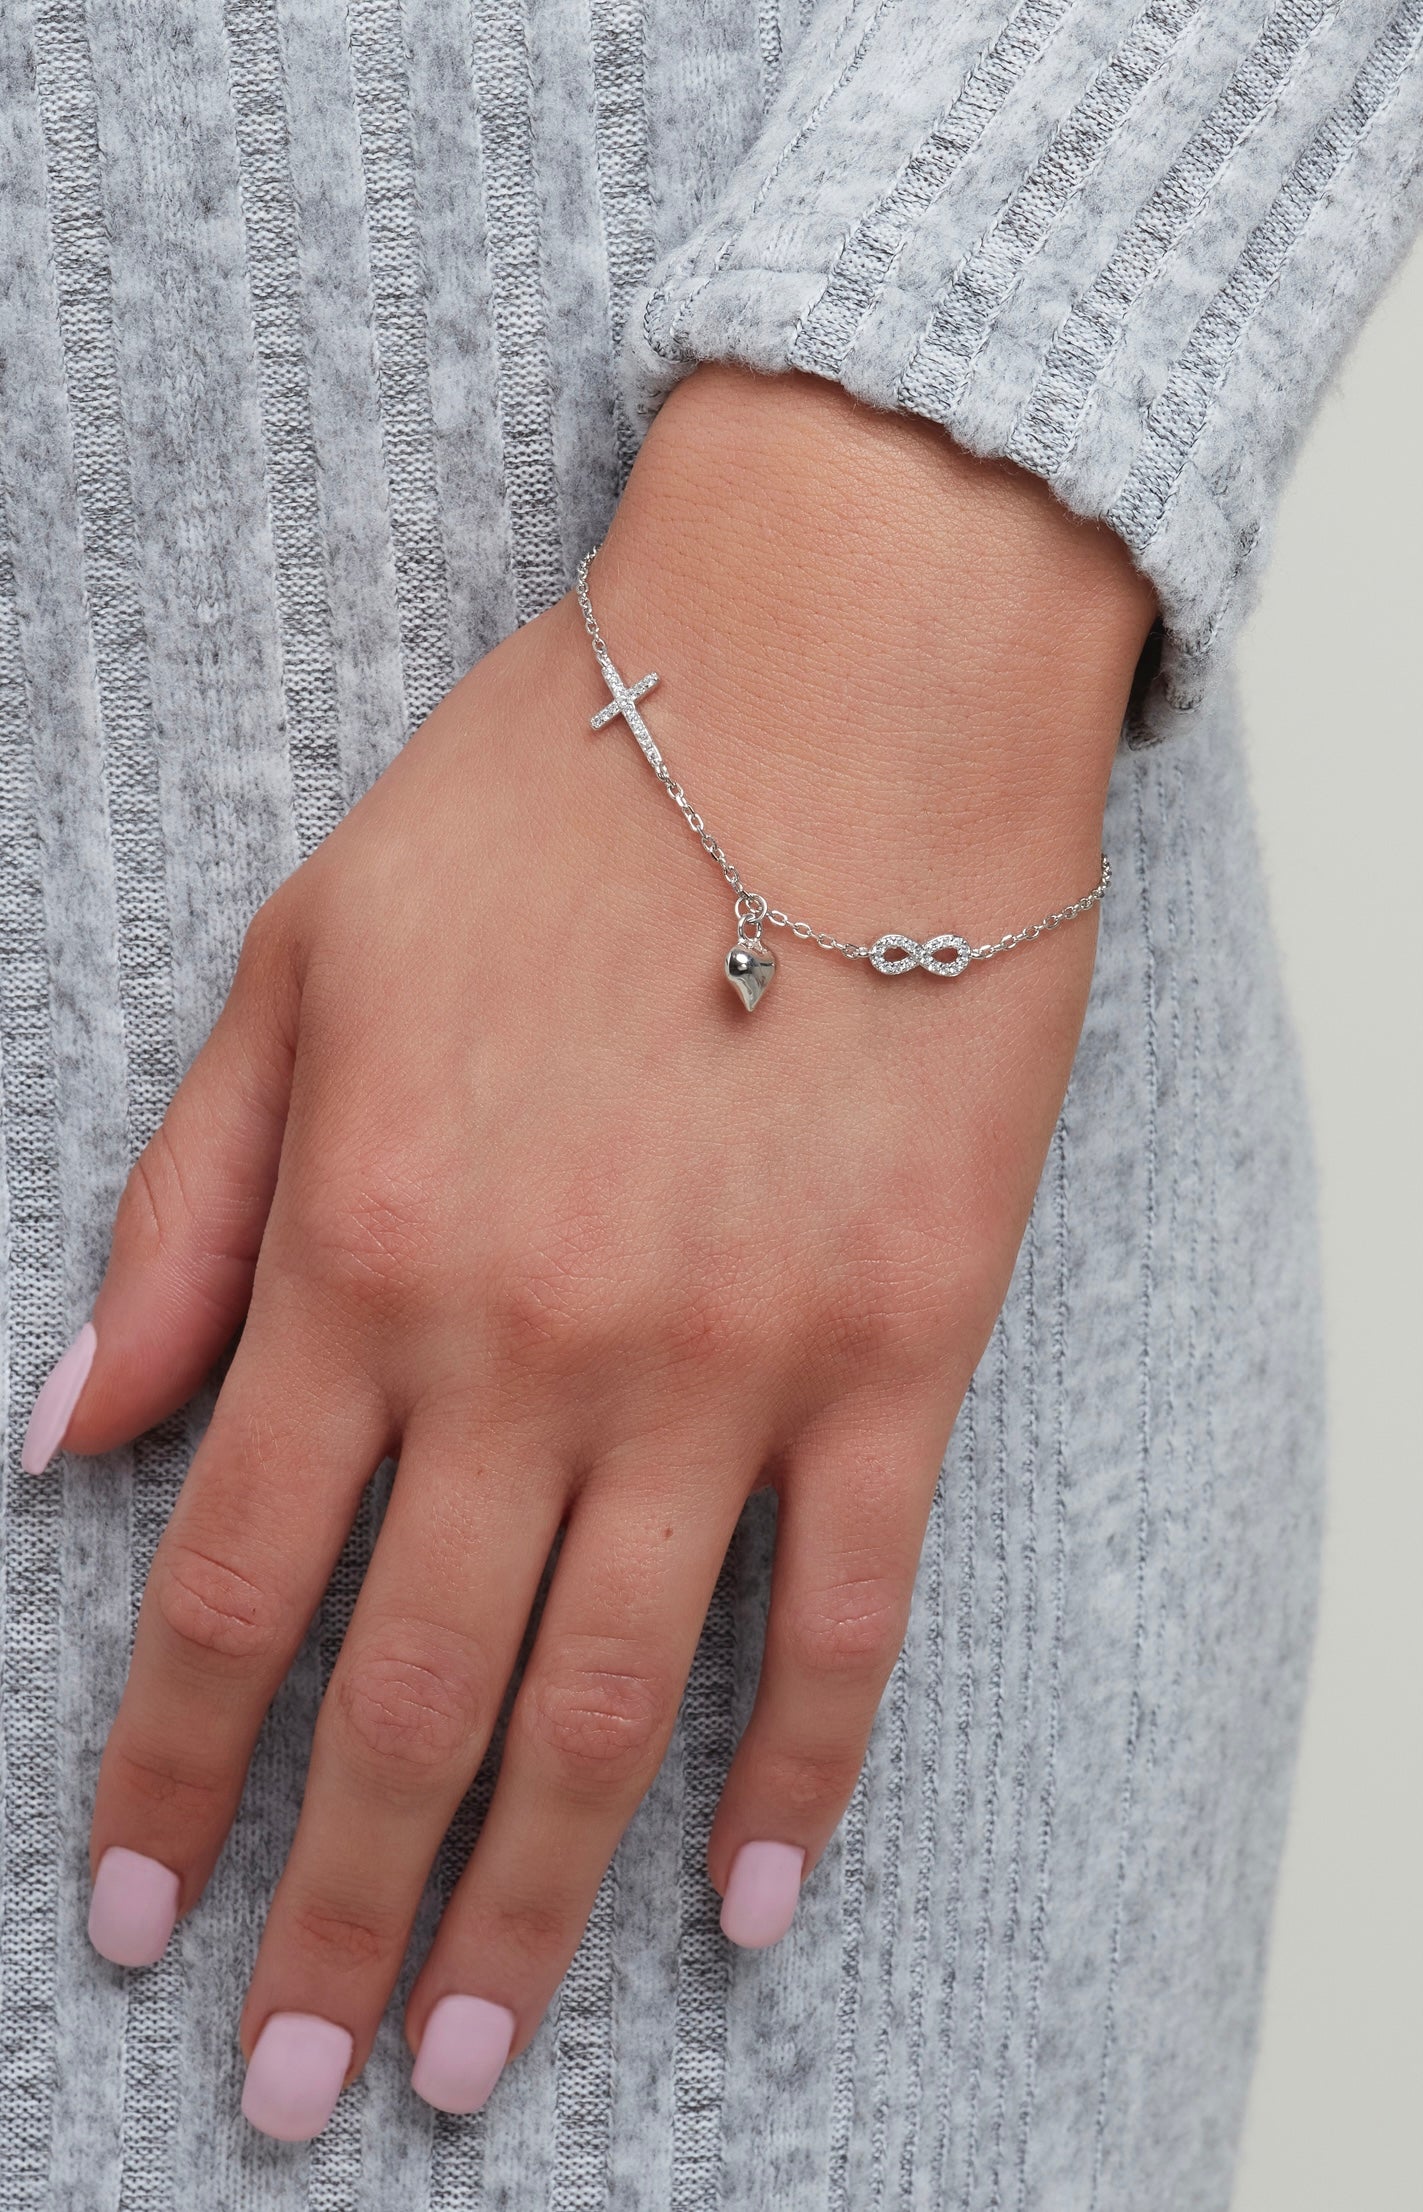 Sparkle By Princess Andre: Sterling Silver Adjustable Charm Bracelet featuring a Cross, Heart and Infinity Symbol with CZ Simulated Diamonds